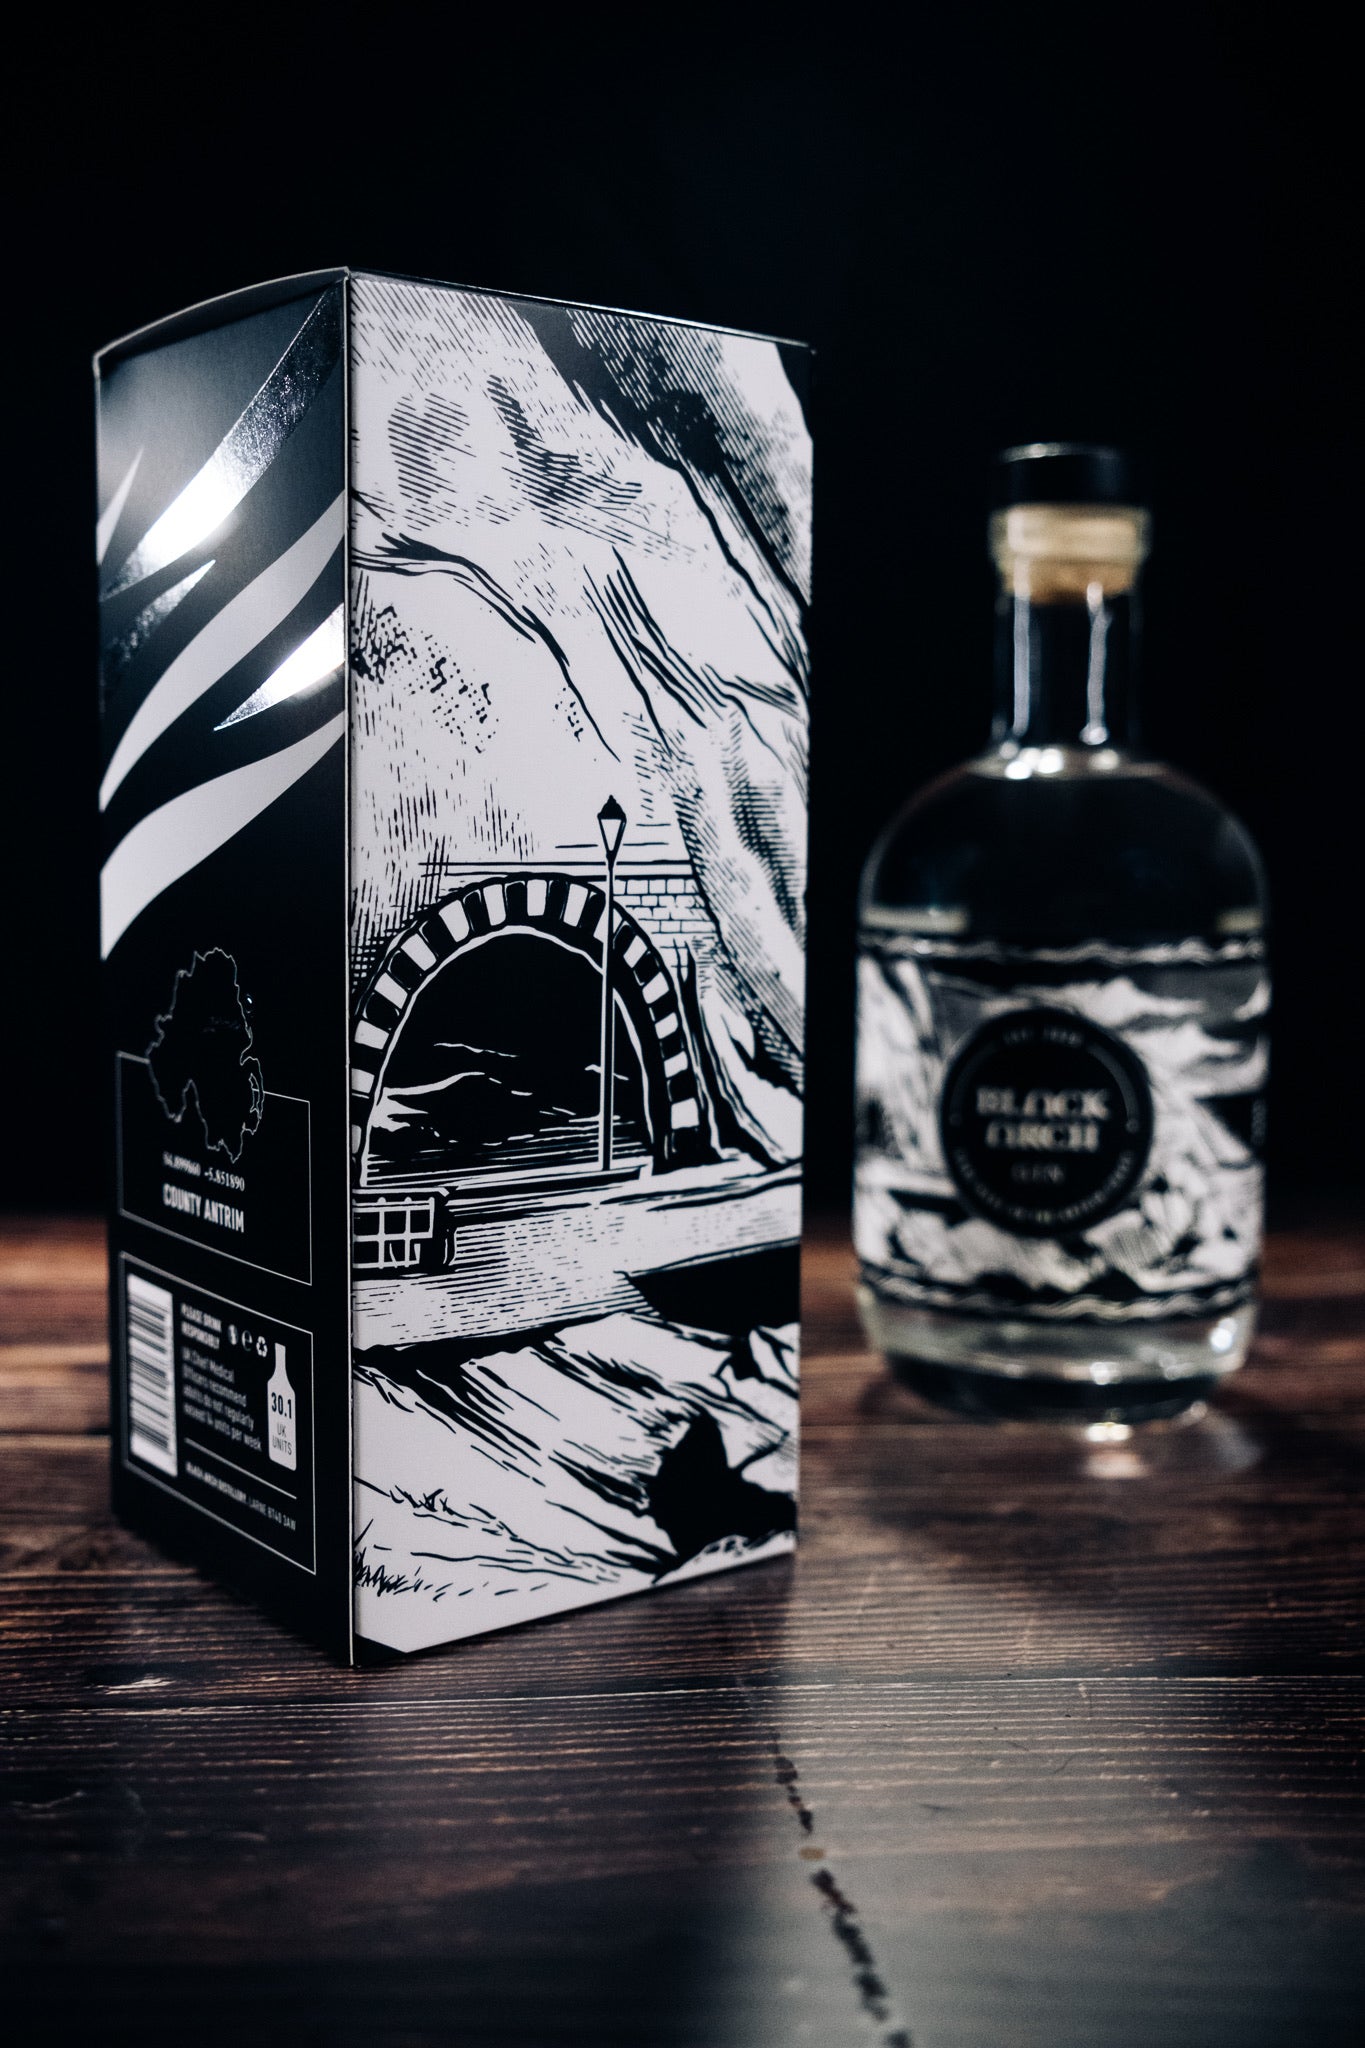 Black Arch Gin *With Gift Box* 70cl